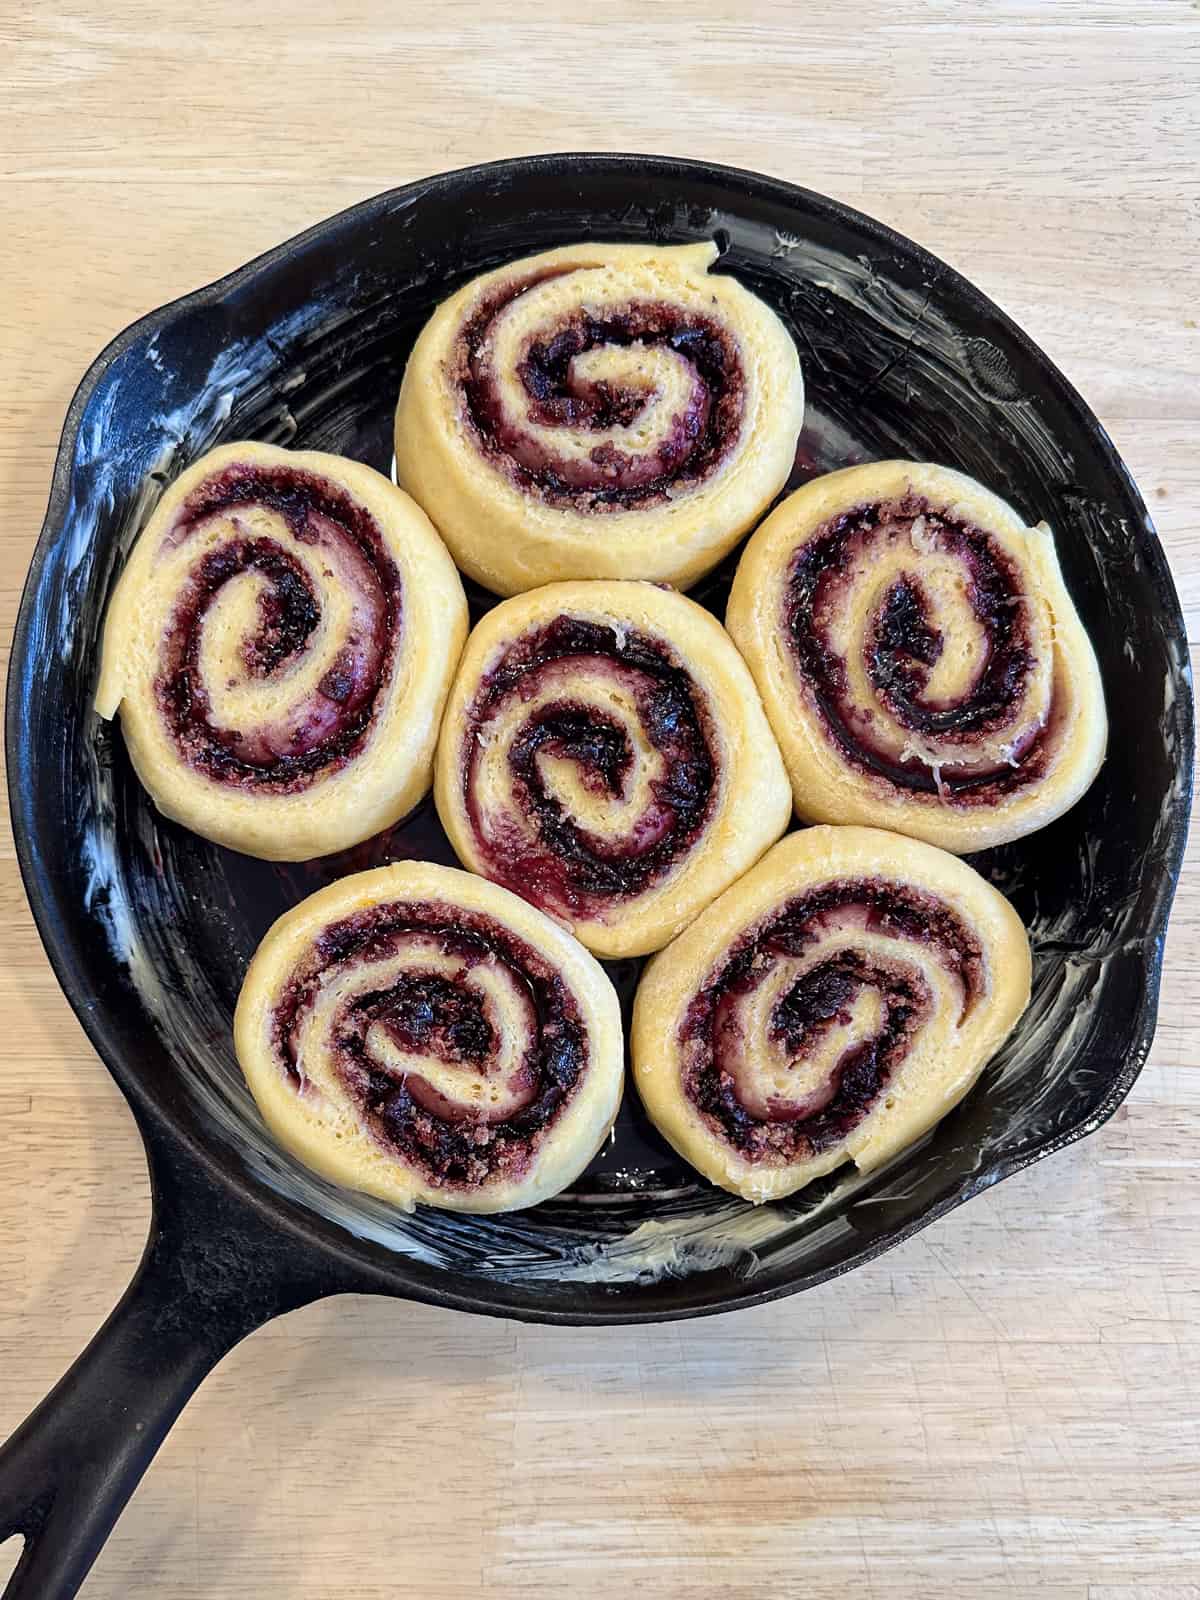 A cast iron pan filled with blueberry orange cinnamon rolls that have risen overnight.